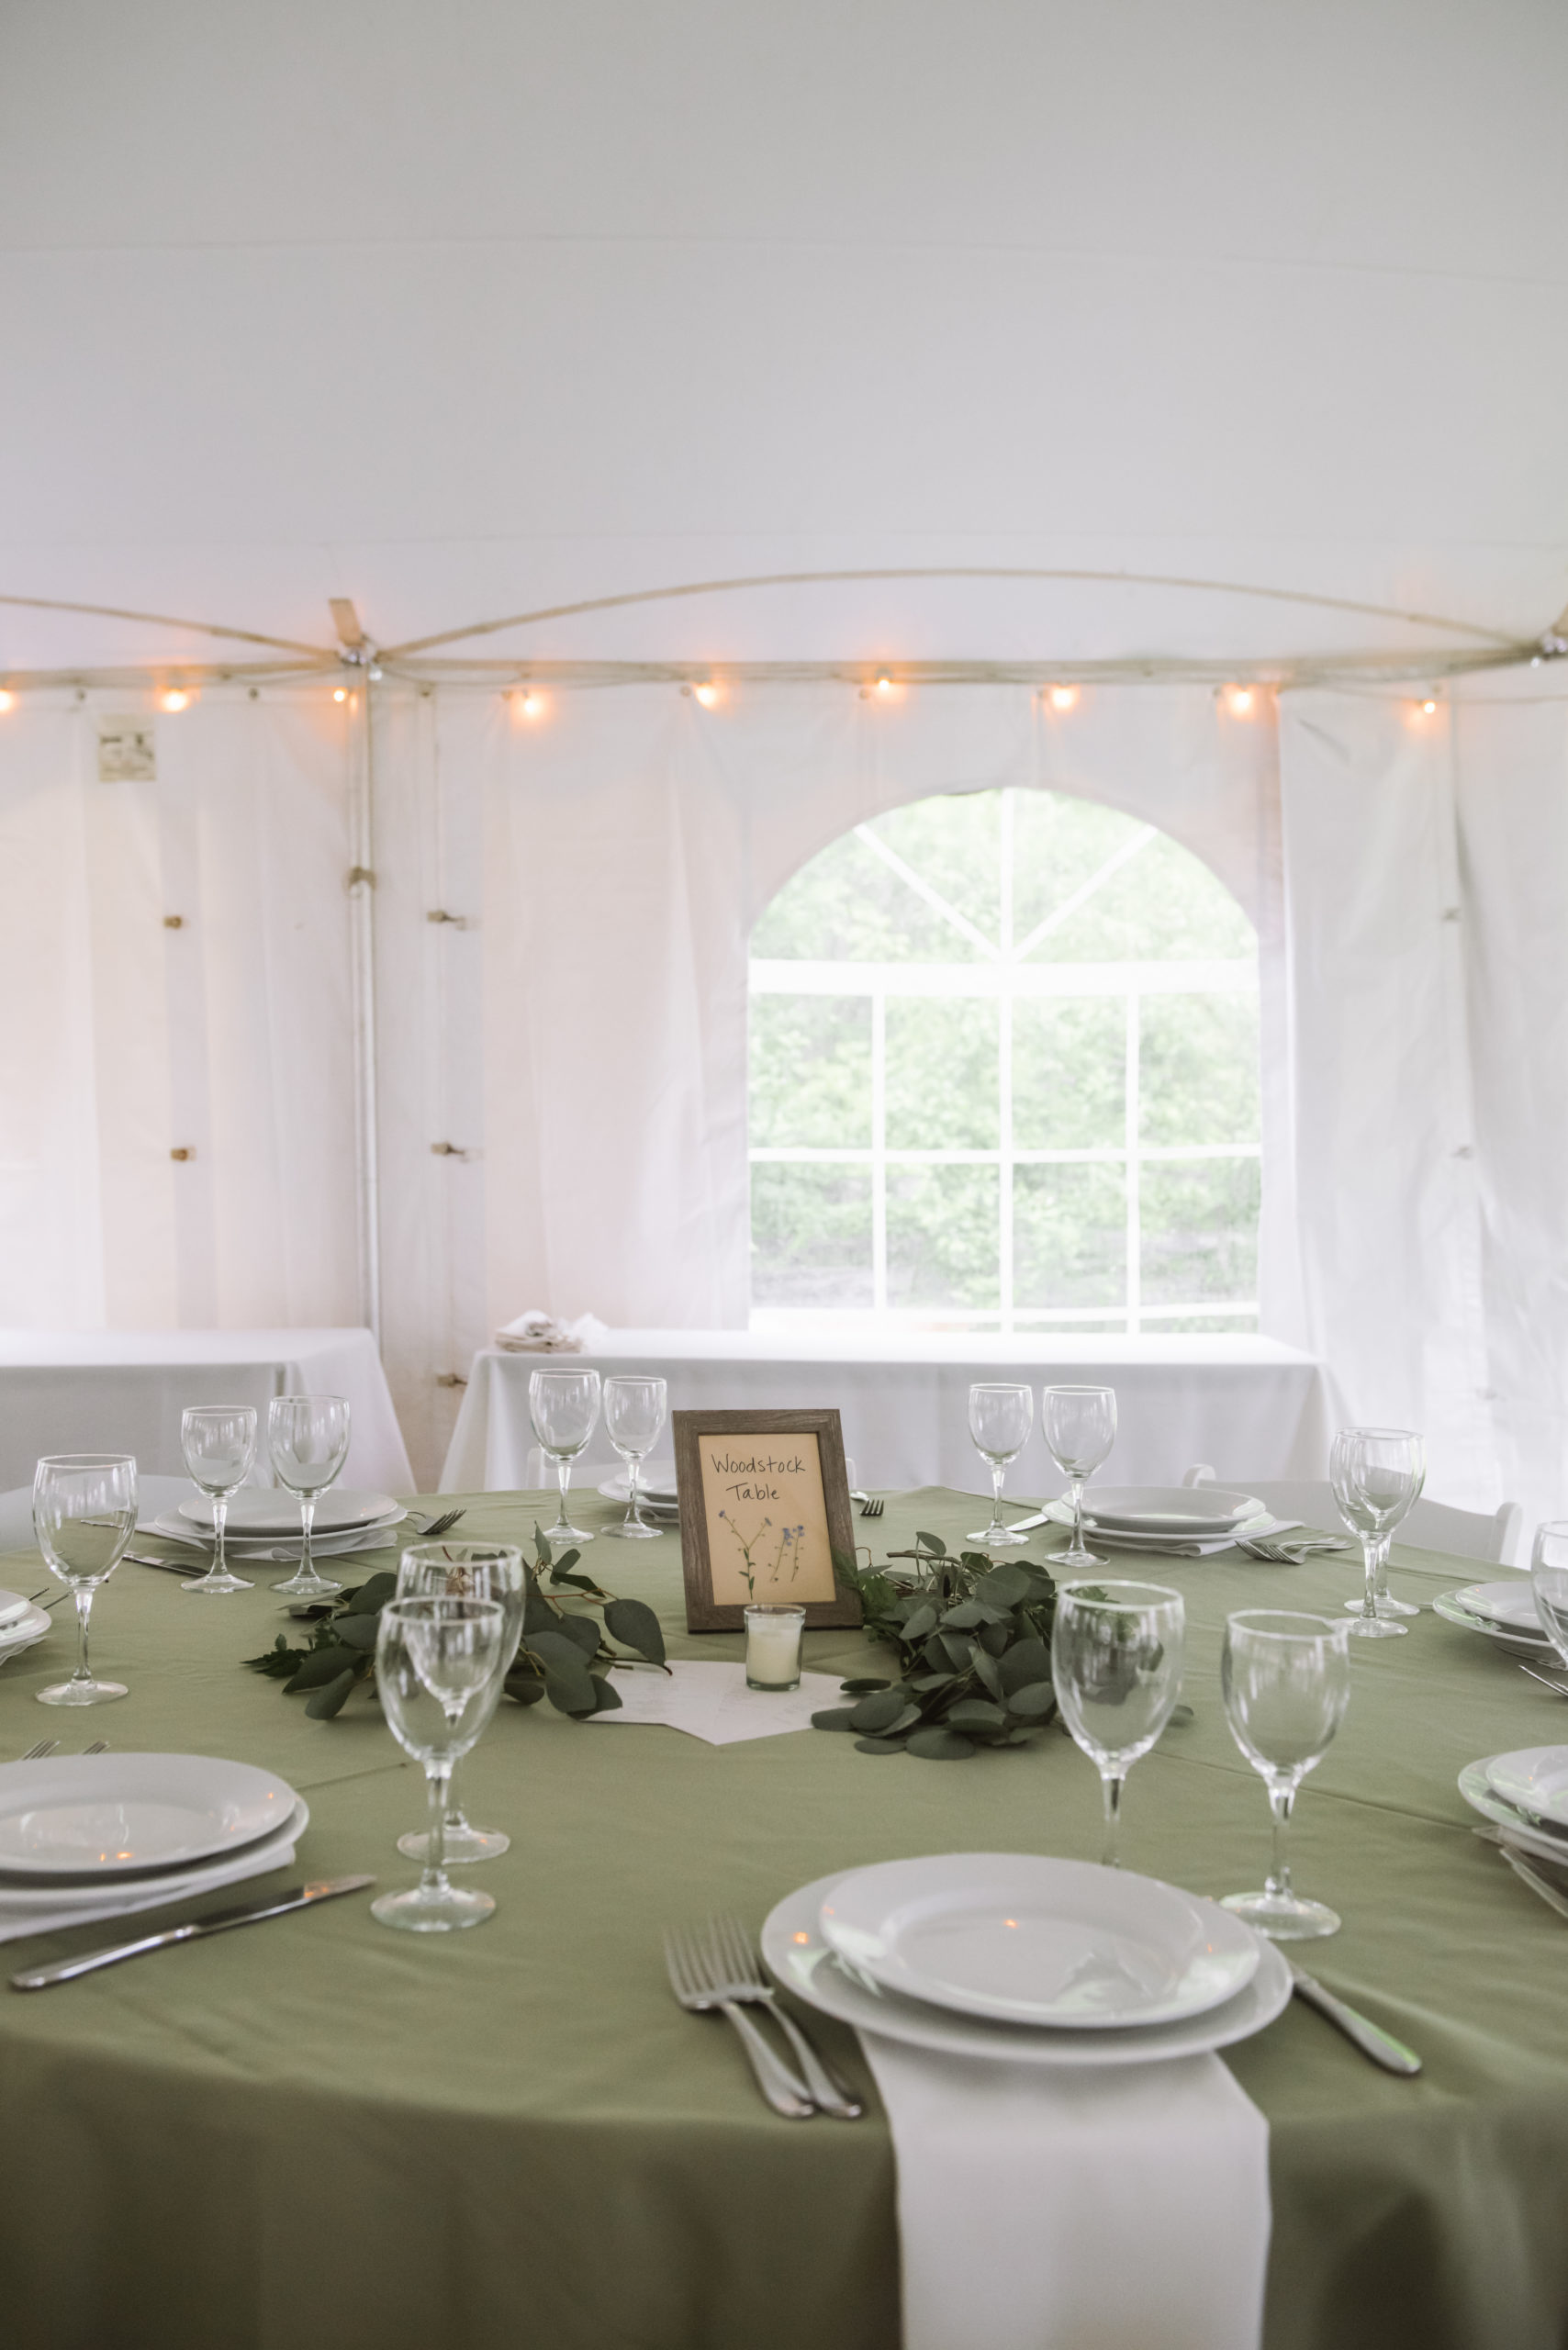 Semi-close view of the "Woodstock Table" at the tented wedding reception. The table is fully set with plates, silverware, glasses, and napkins. There is a silver framed sign with a wreath of greenery around it.